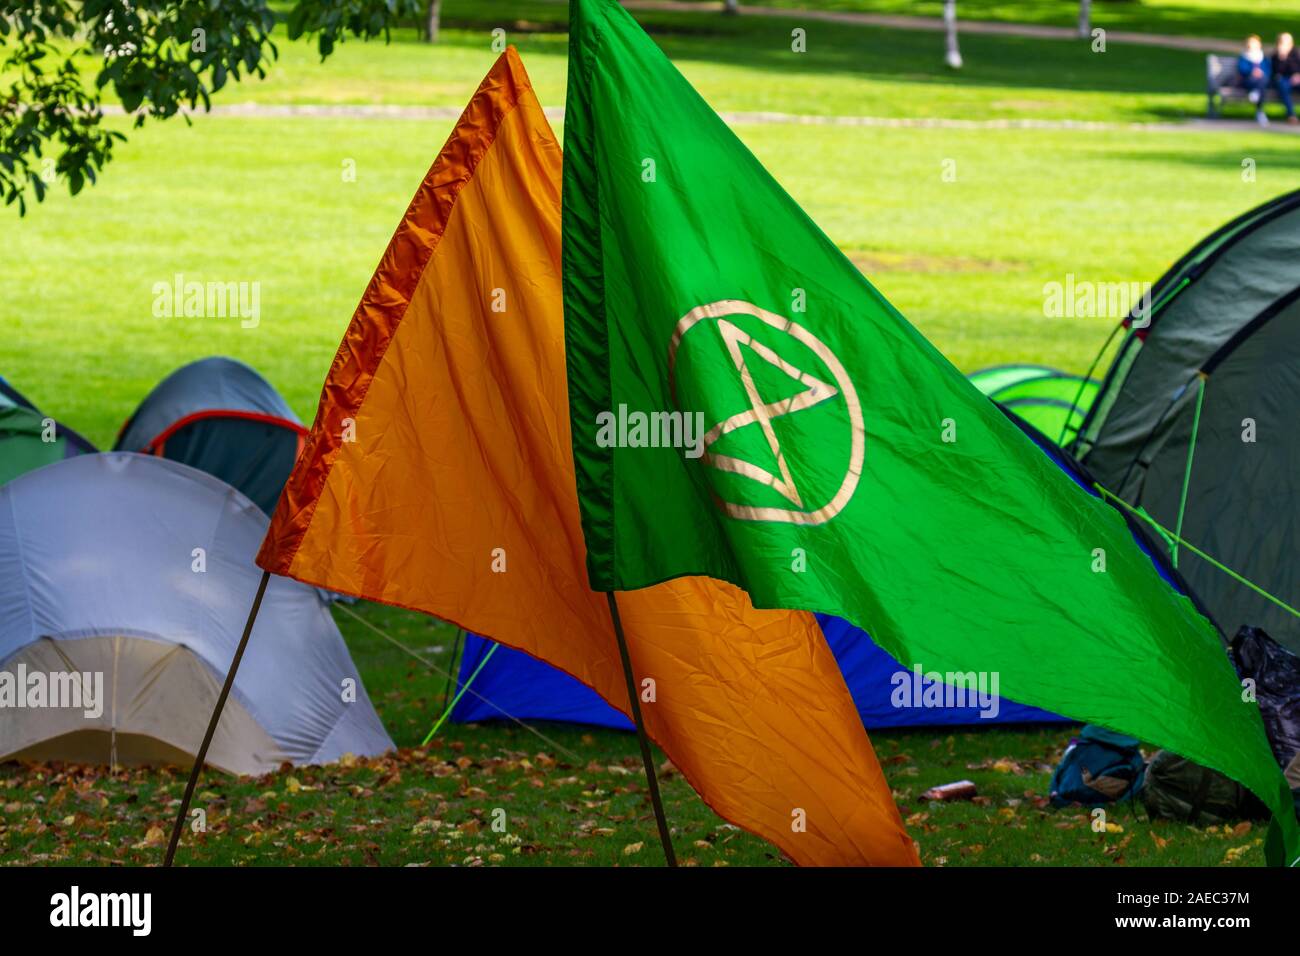 Extinction Rebellion green and orange flags with symbol. Activism group to combat climate change and protect environment. No-one. Dublin, Ireland Stock Photo